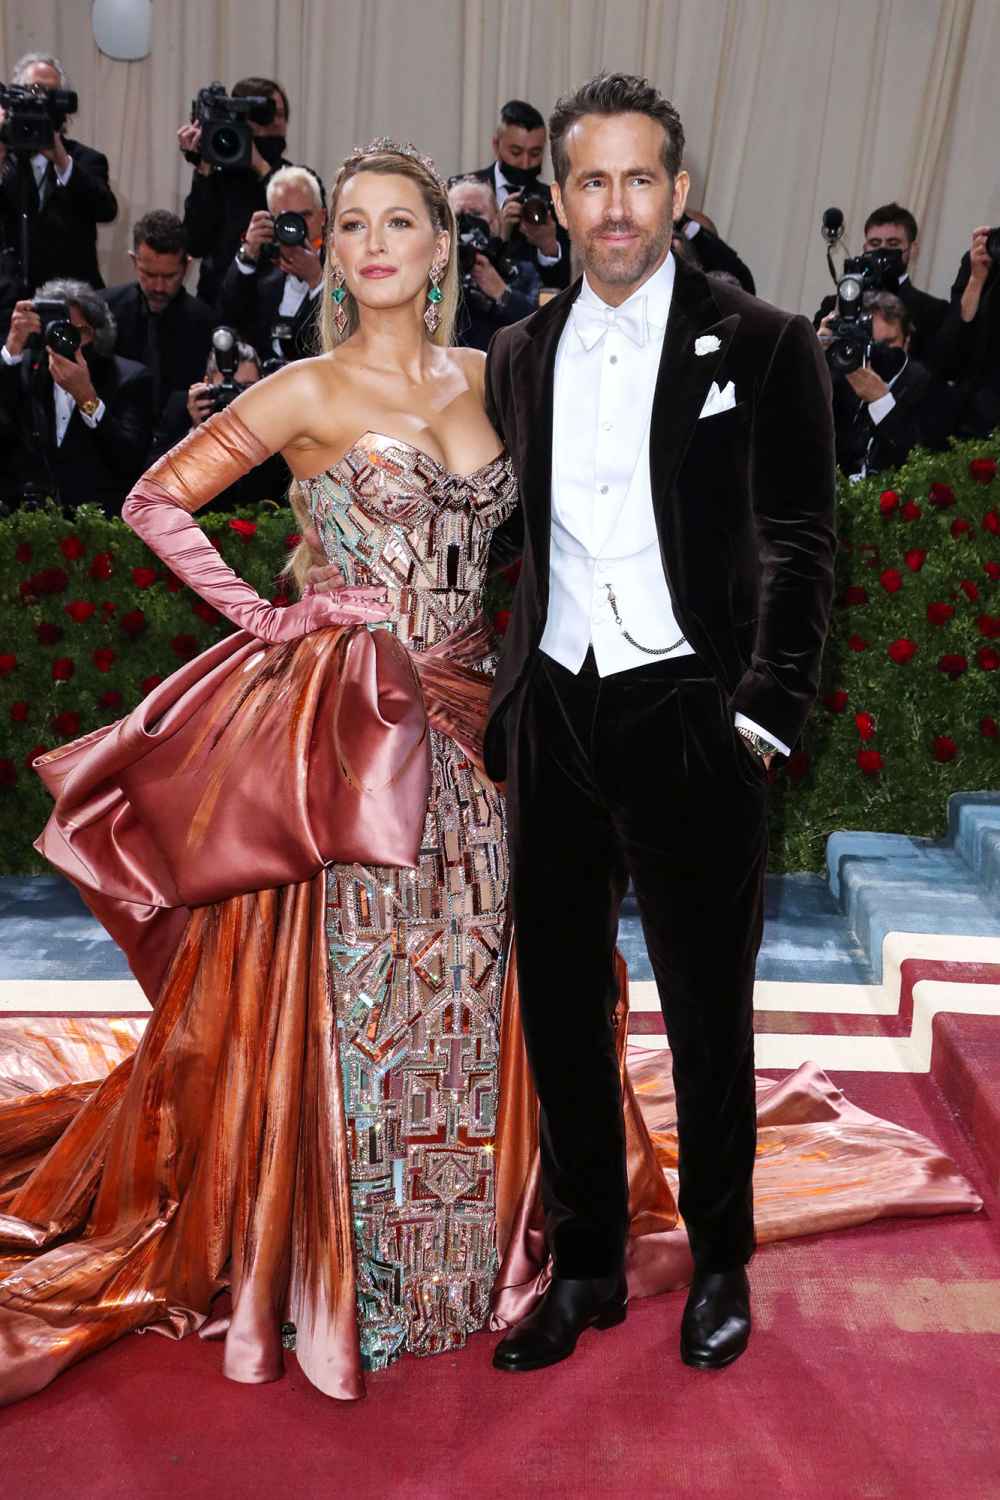 Met Gala 2014: My complete red carpet round up